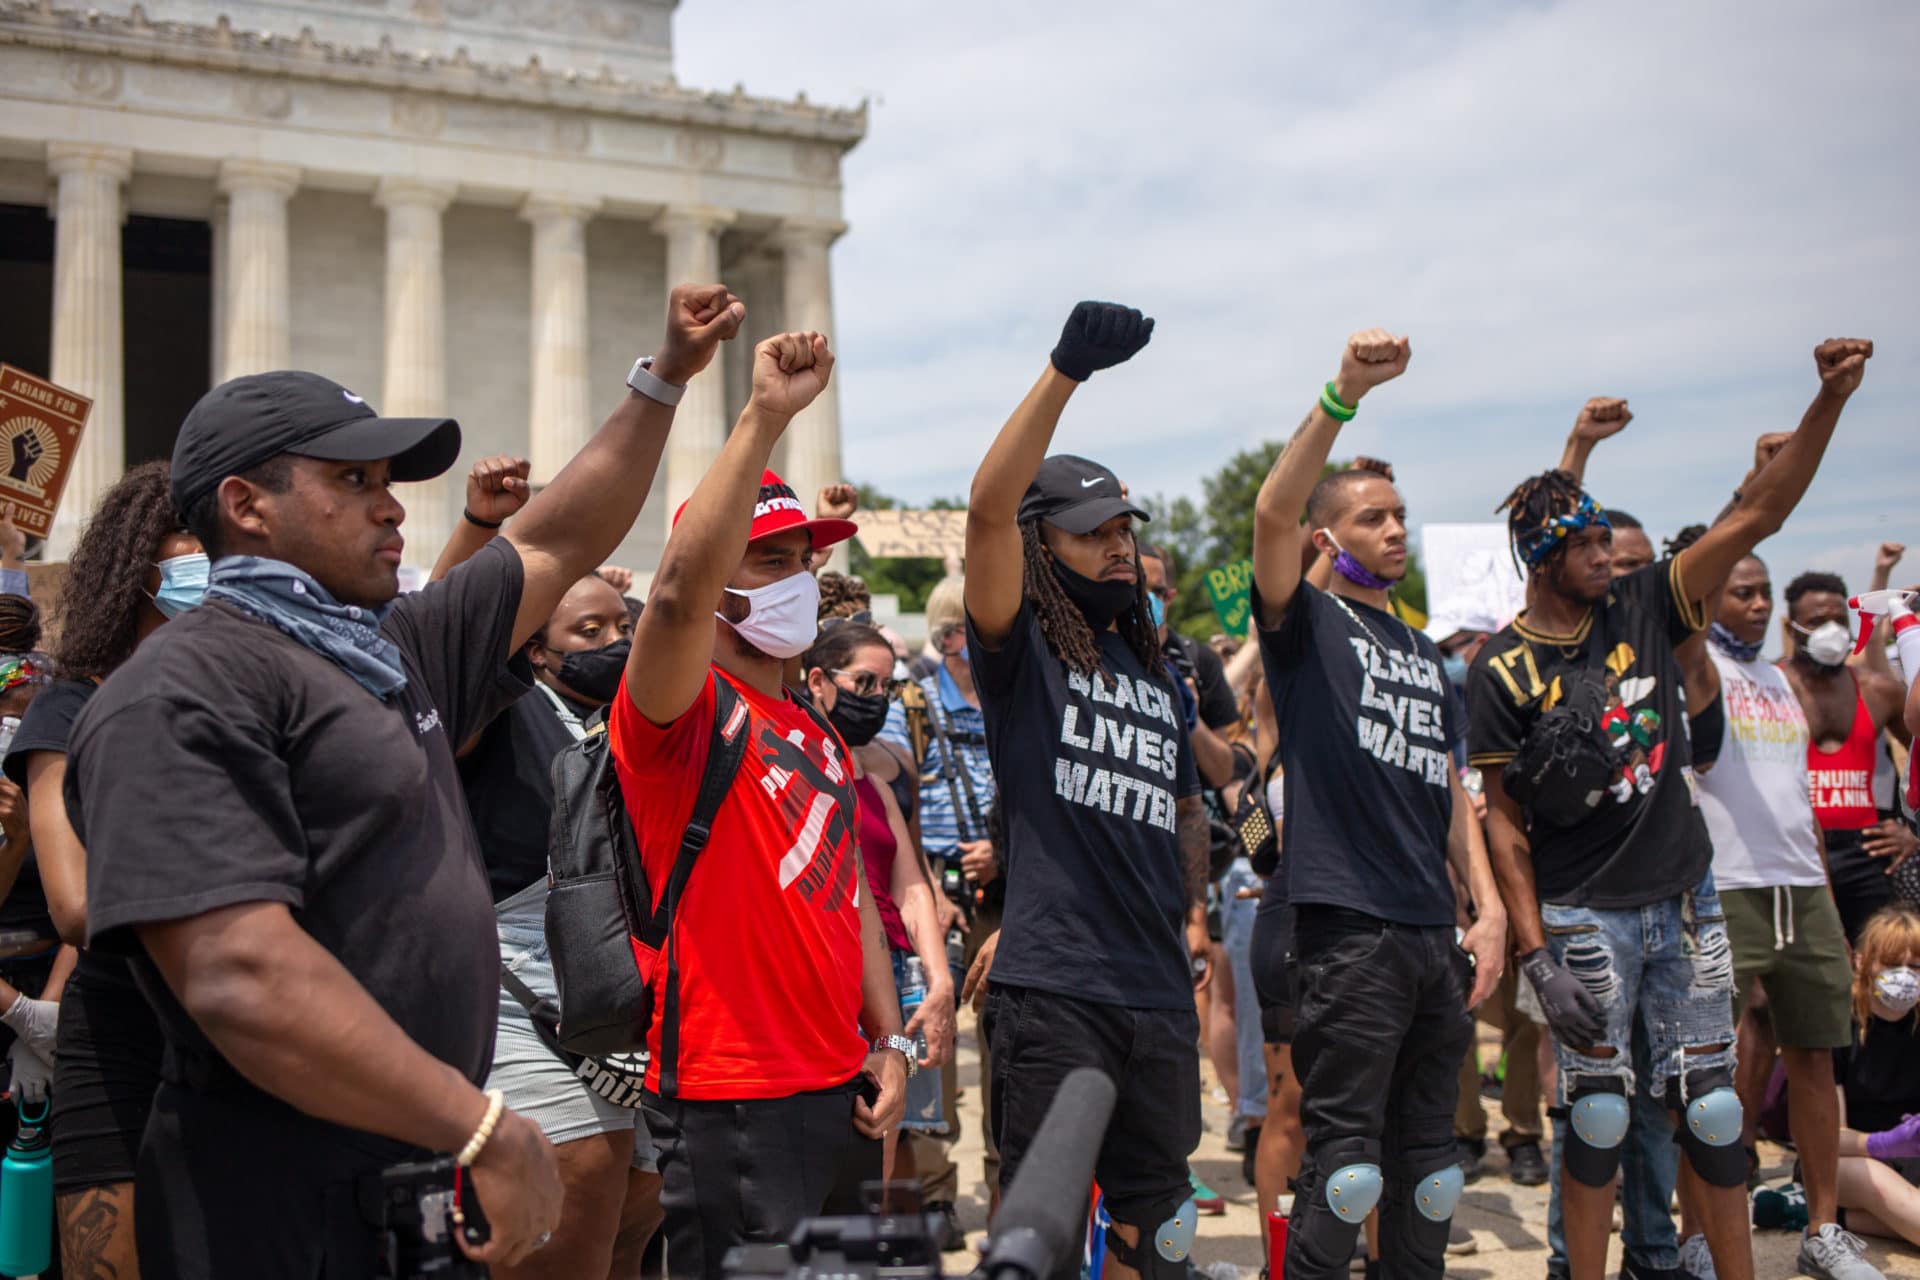 Black activists give stirring, emotional speeches to a large crowd gathered on the steps of the Lincoln Memorial.